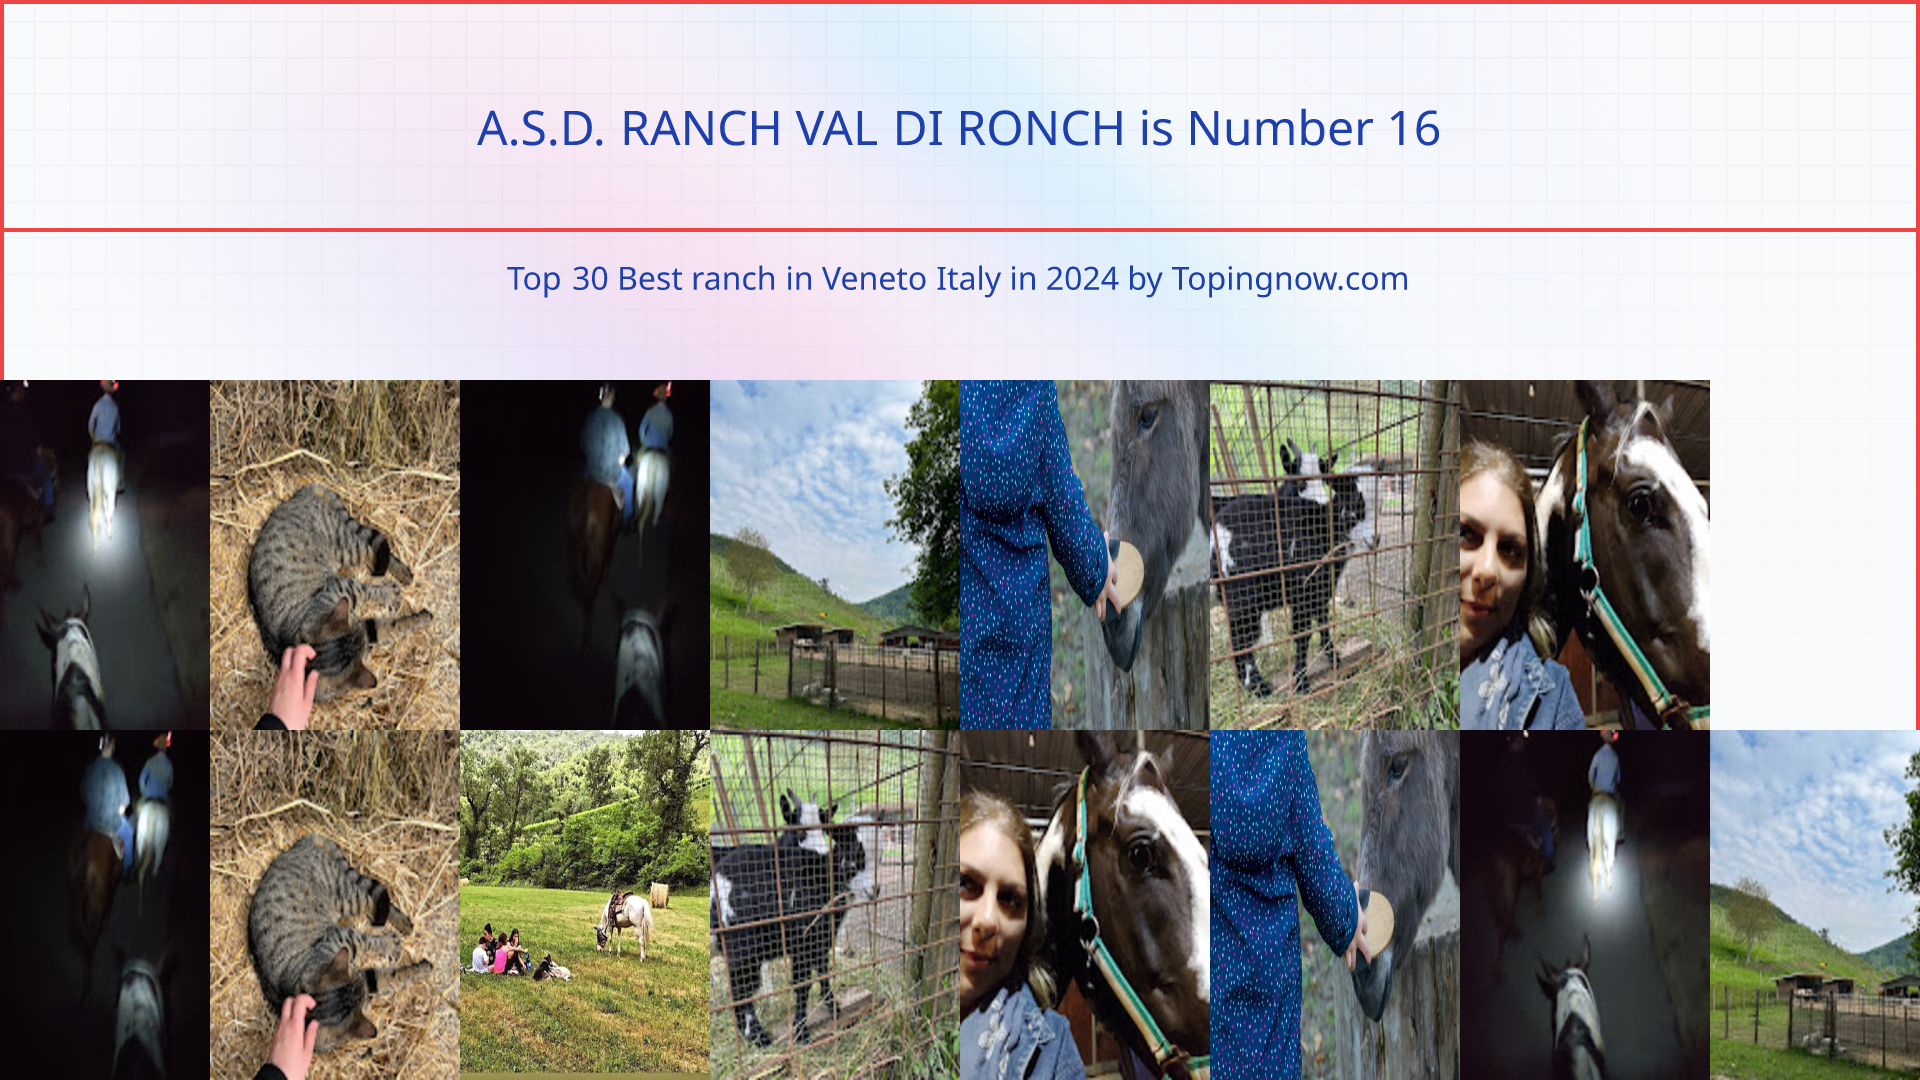 A.S.D. RANCH VAL DI RONCH: Top 30 Best ranch in Veneto Italy in 2024